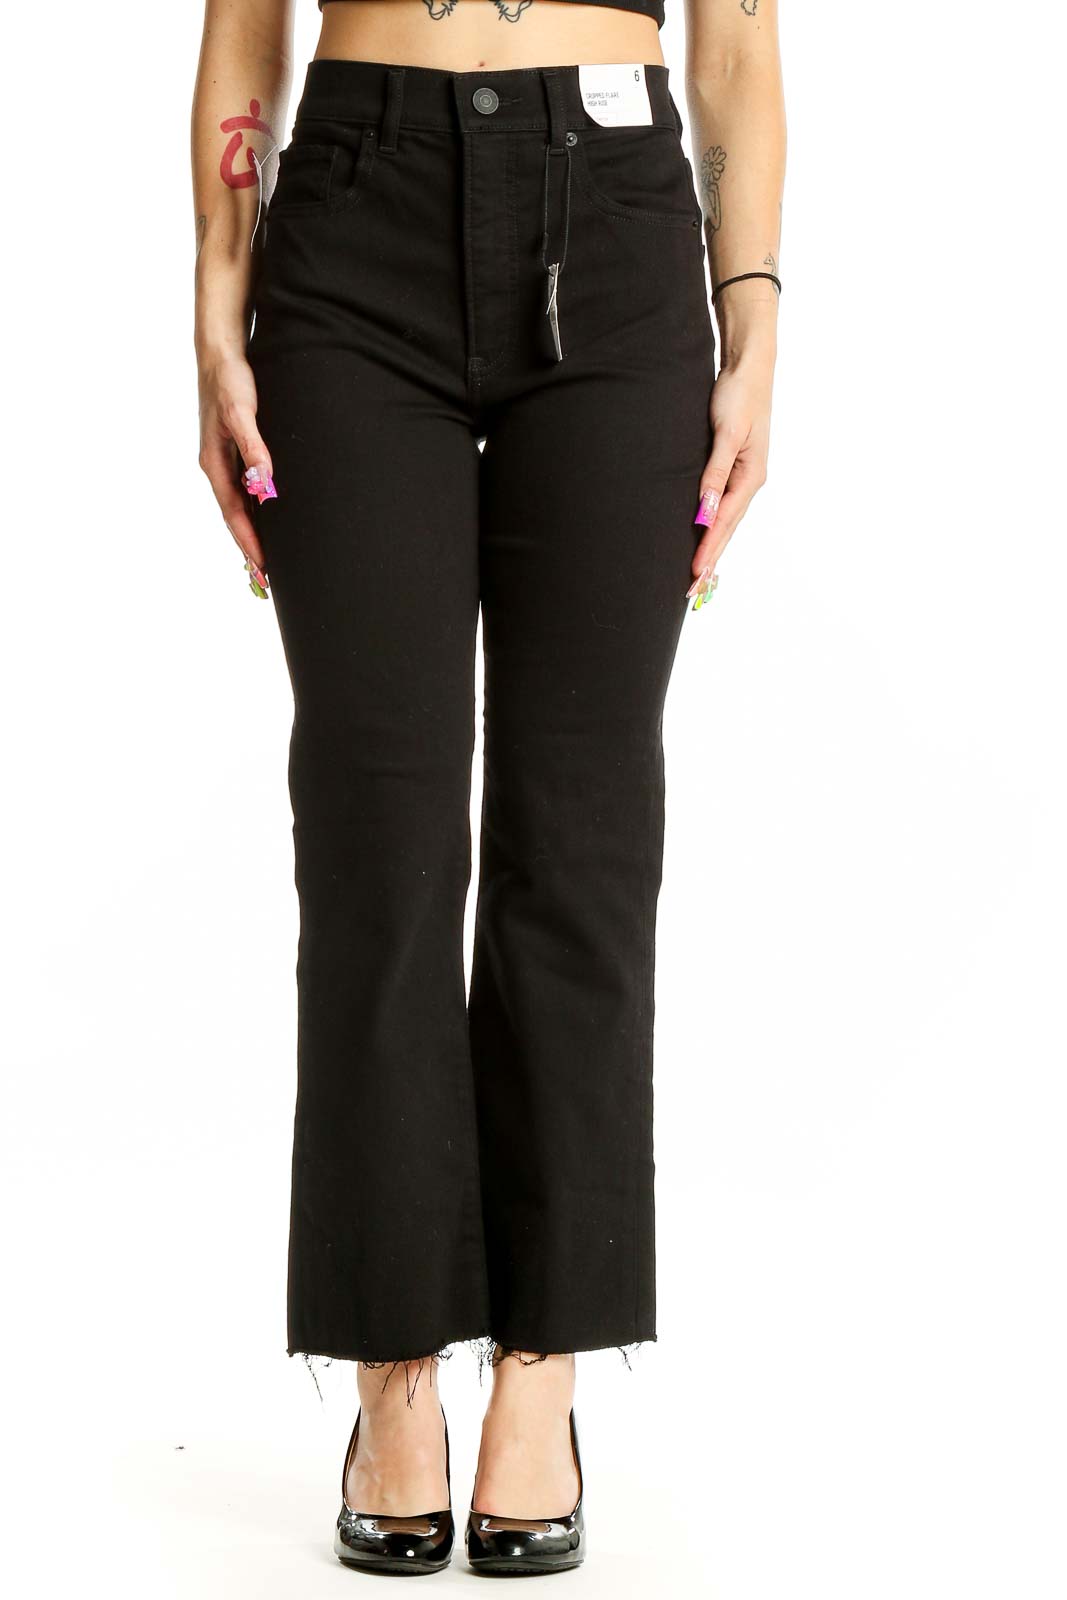 Black Straight Texture Pants Front